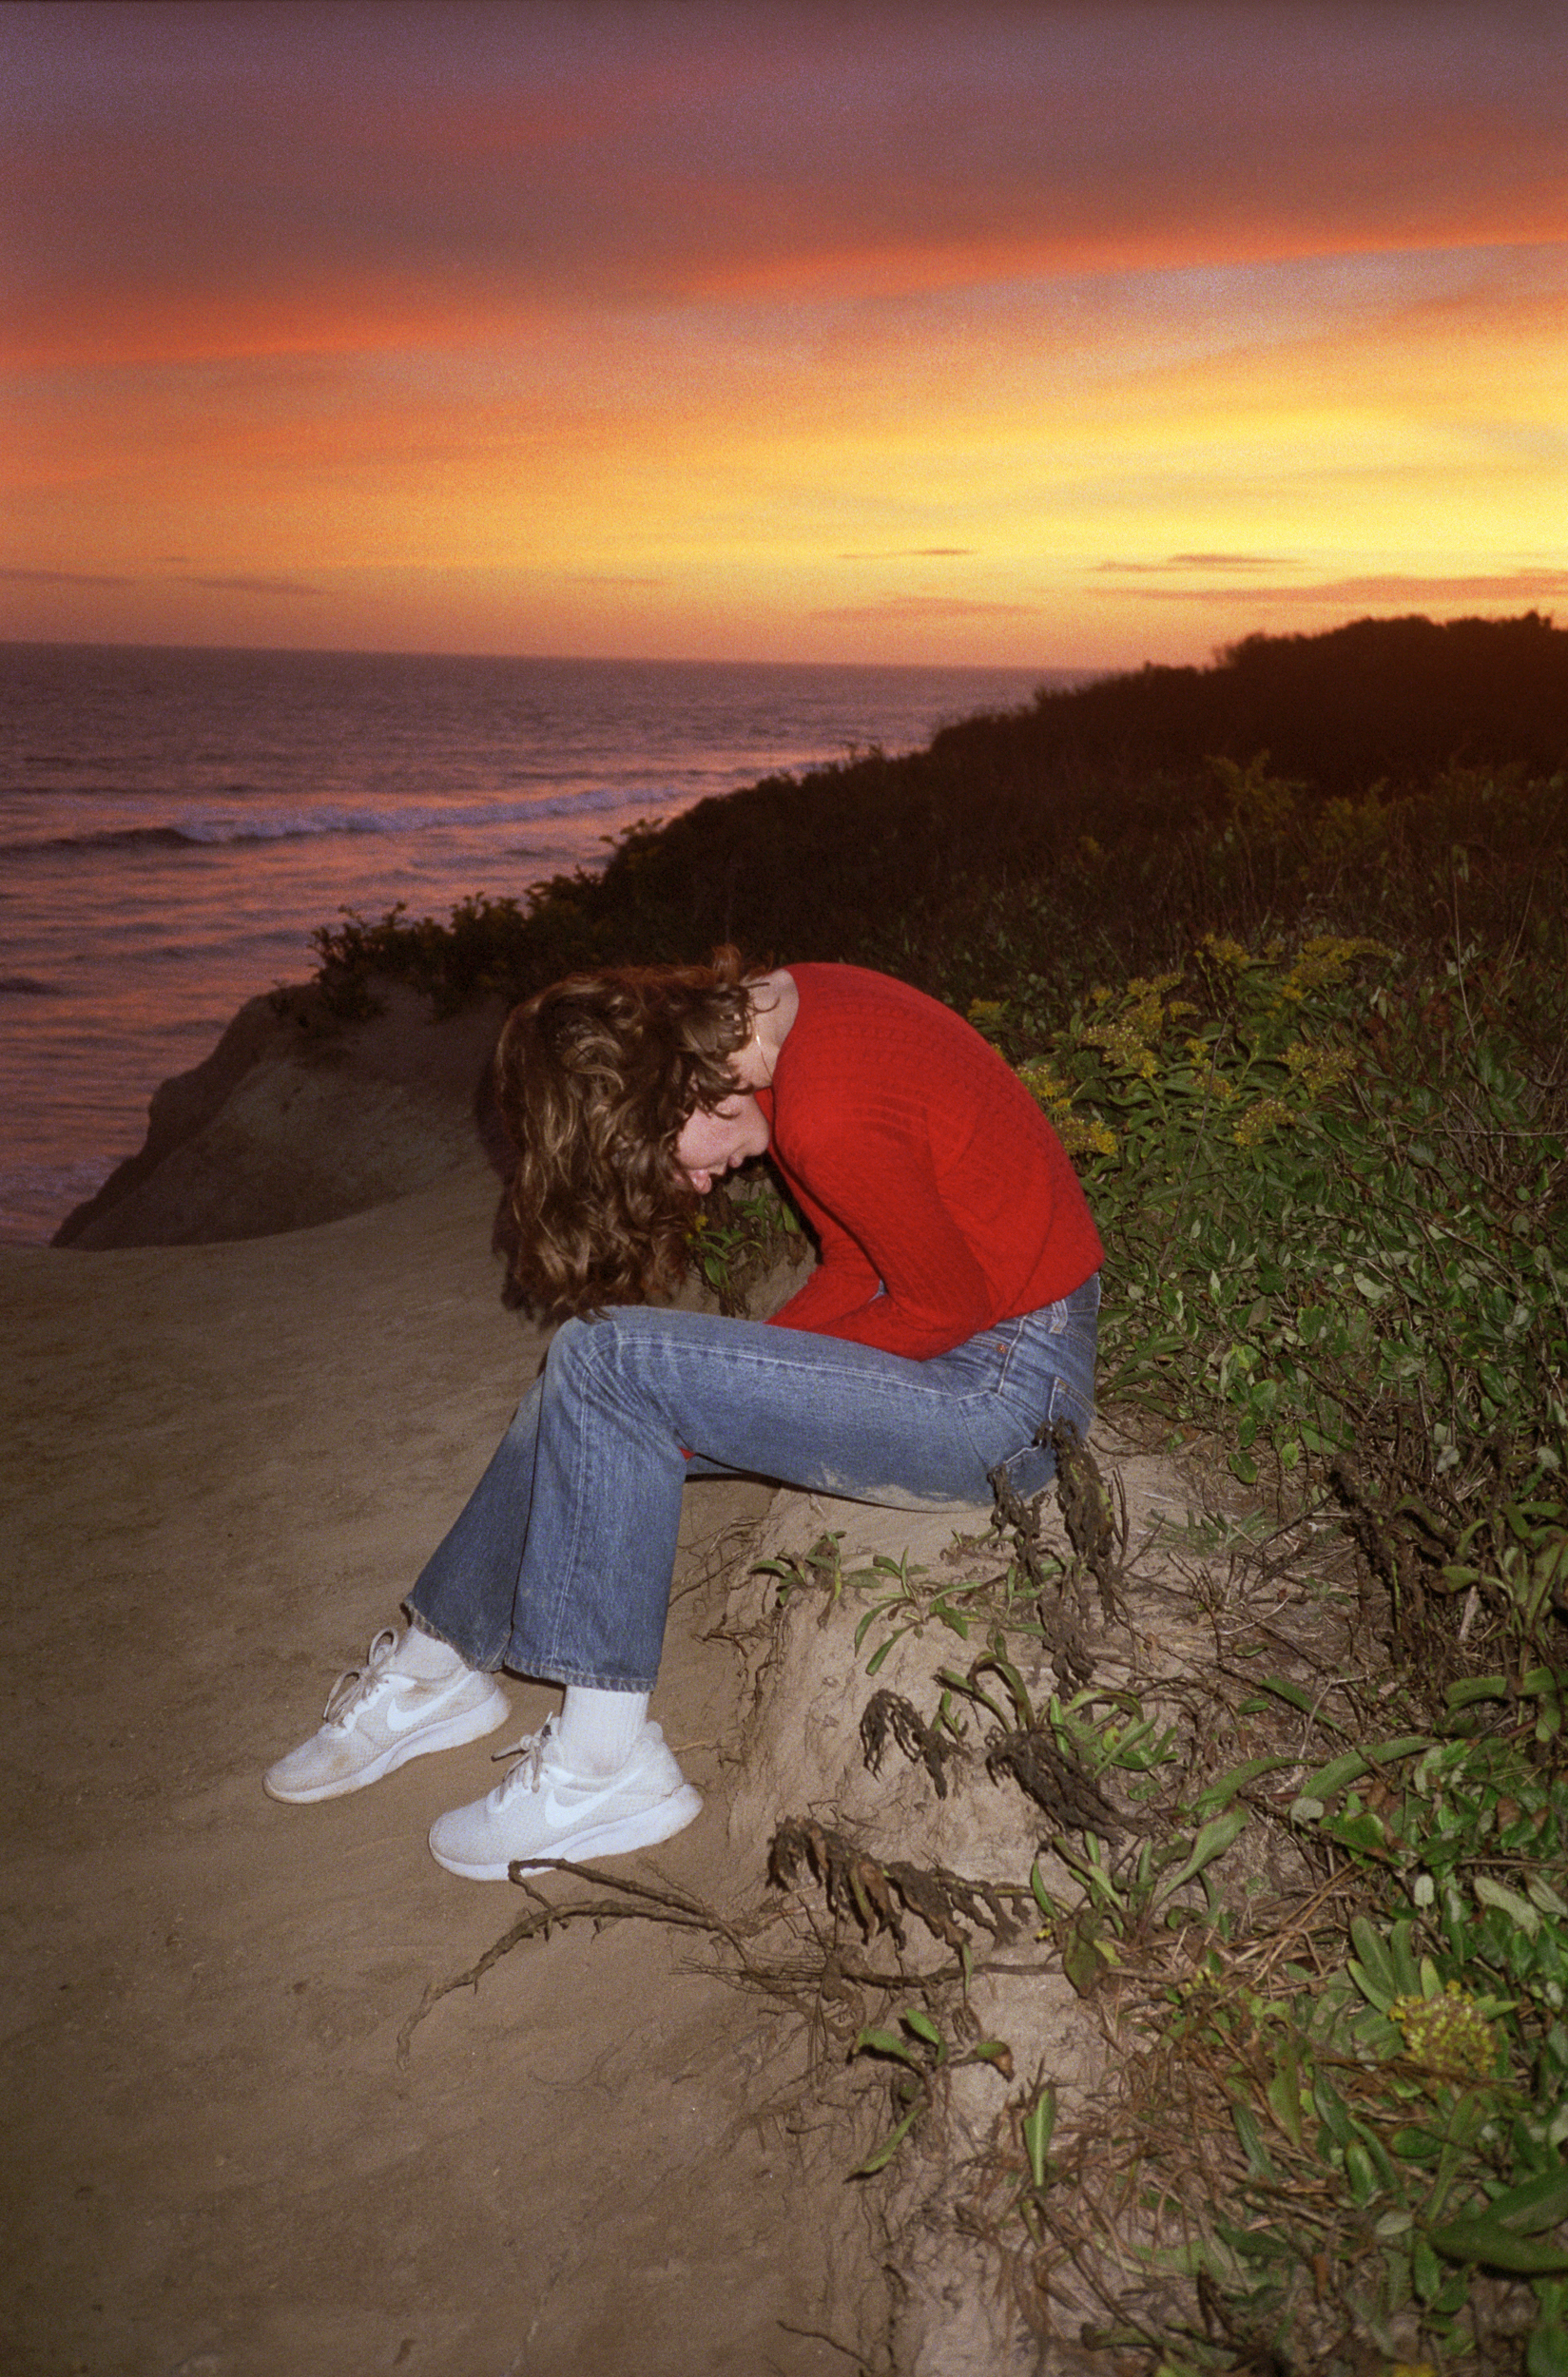 a person in a red sweater and jeans leans forward in front of a beach sunset